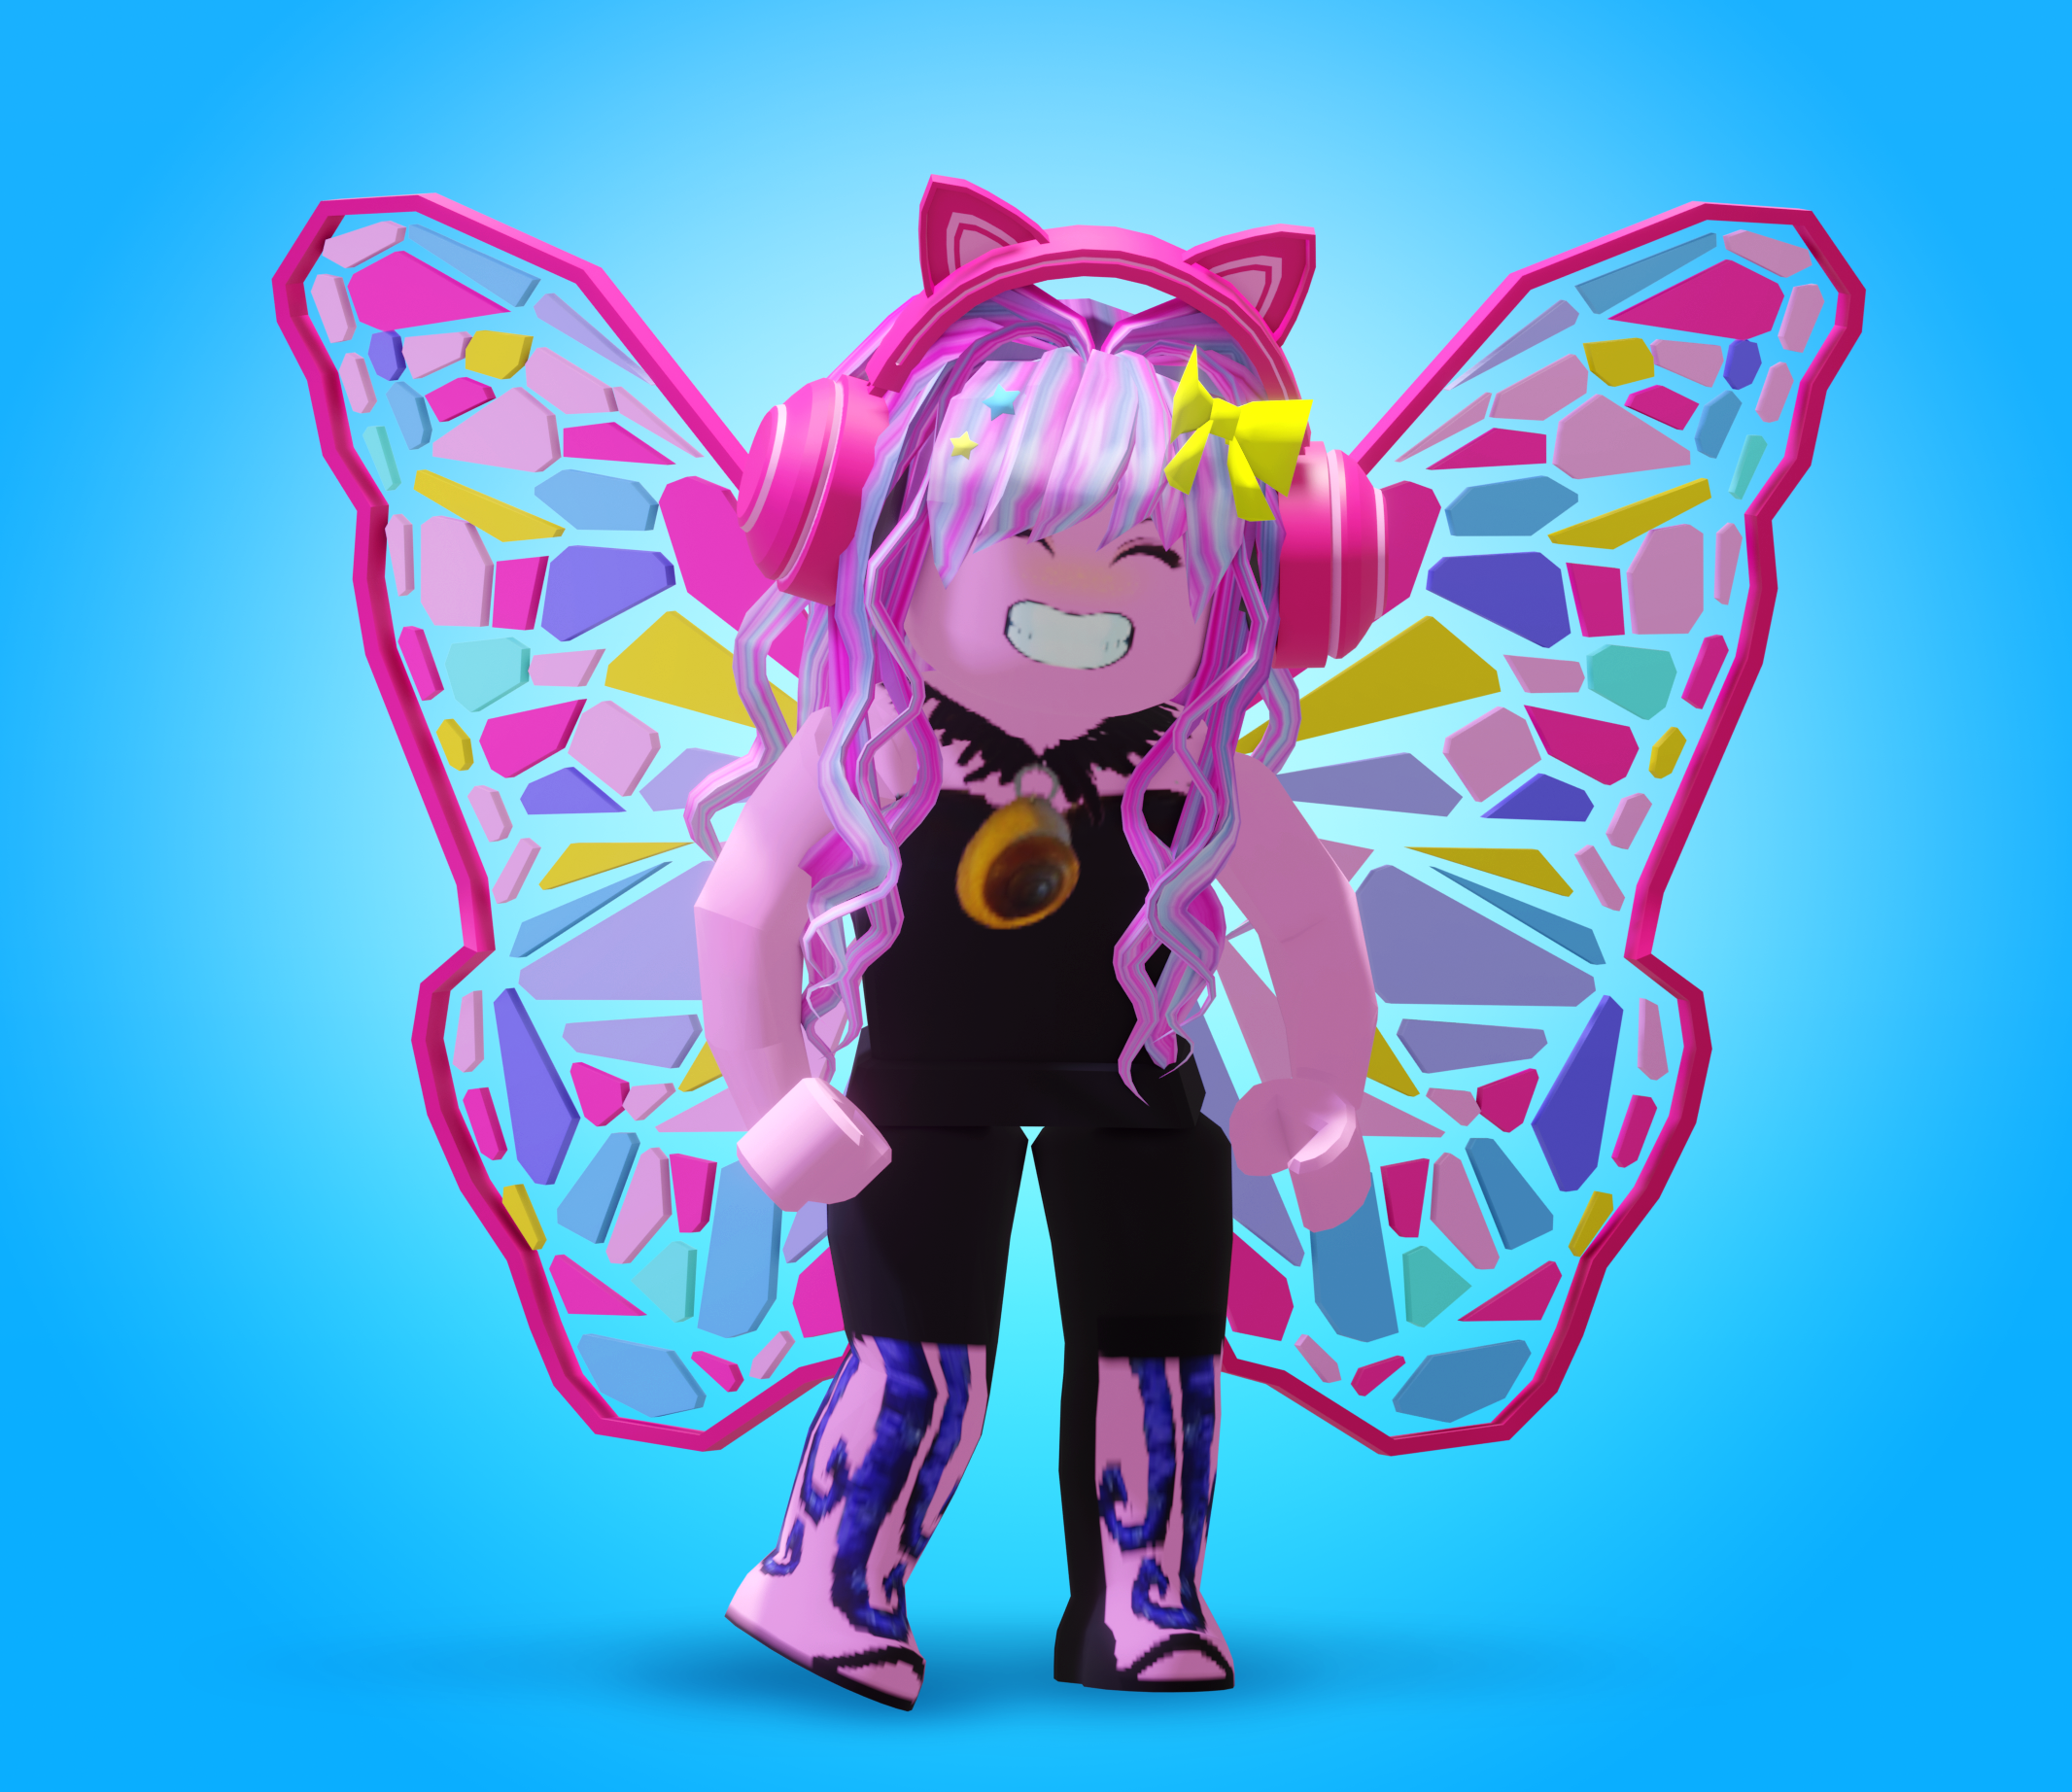 FREE-ITEM] HOW TO GET THE FAIRY HAIR! (Roblox Sunsilk Event) 